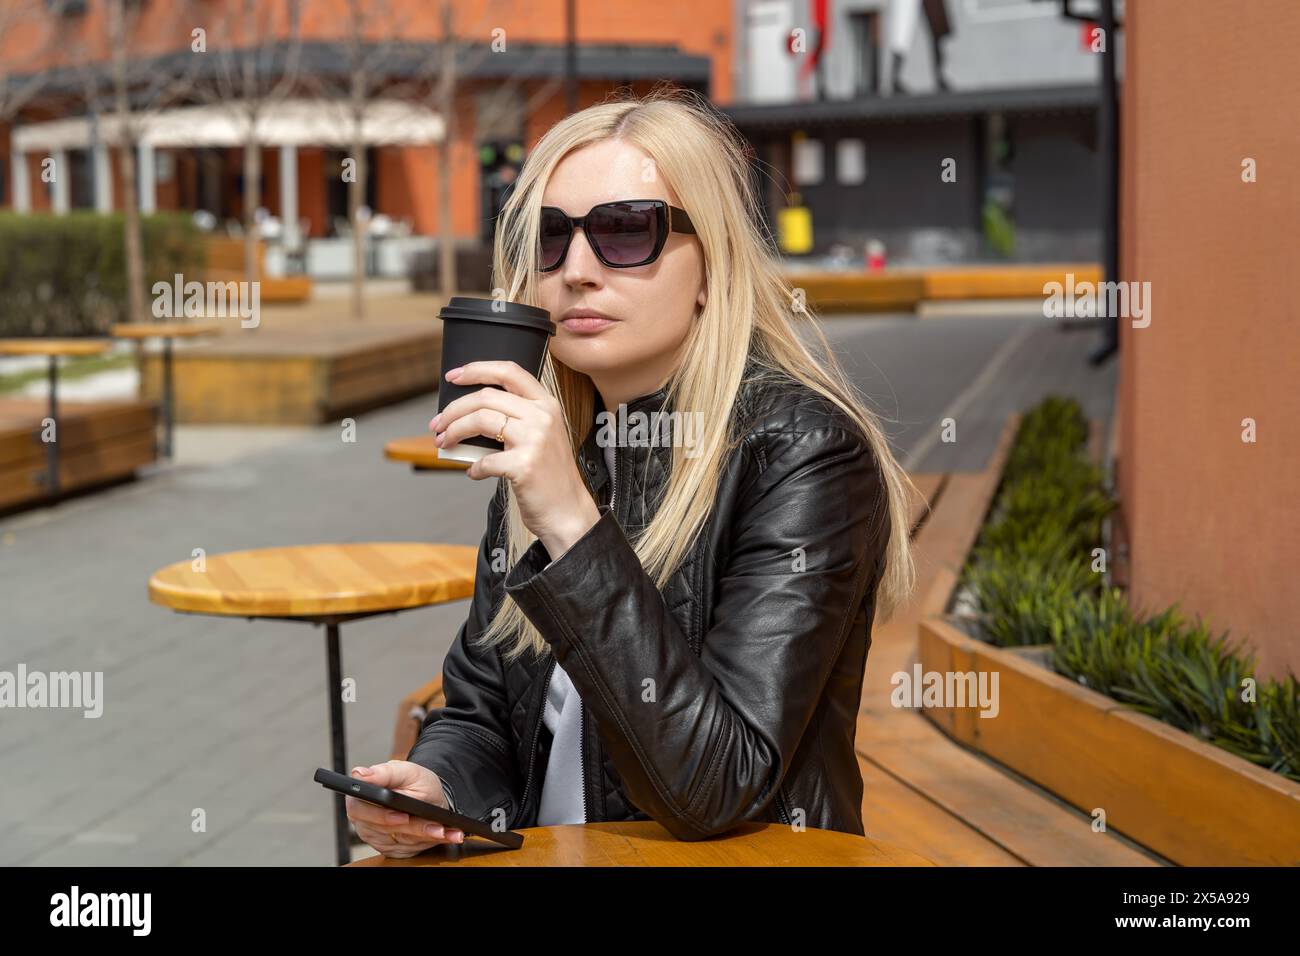 A fashionable woman in a leather jacket sips coffee while using her smartphone at an outdoor café Stock Photo